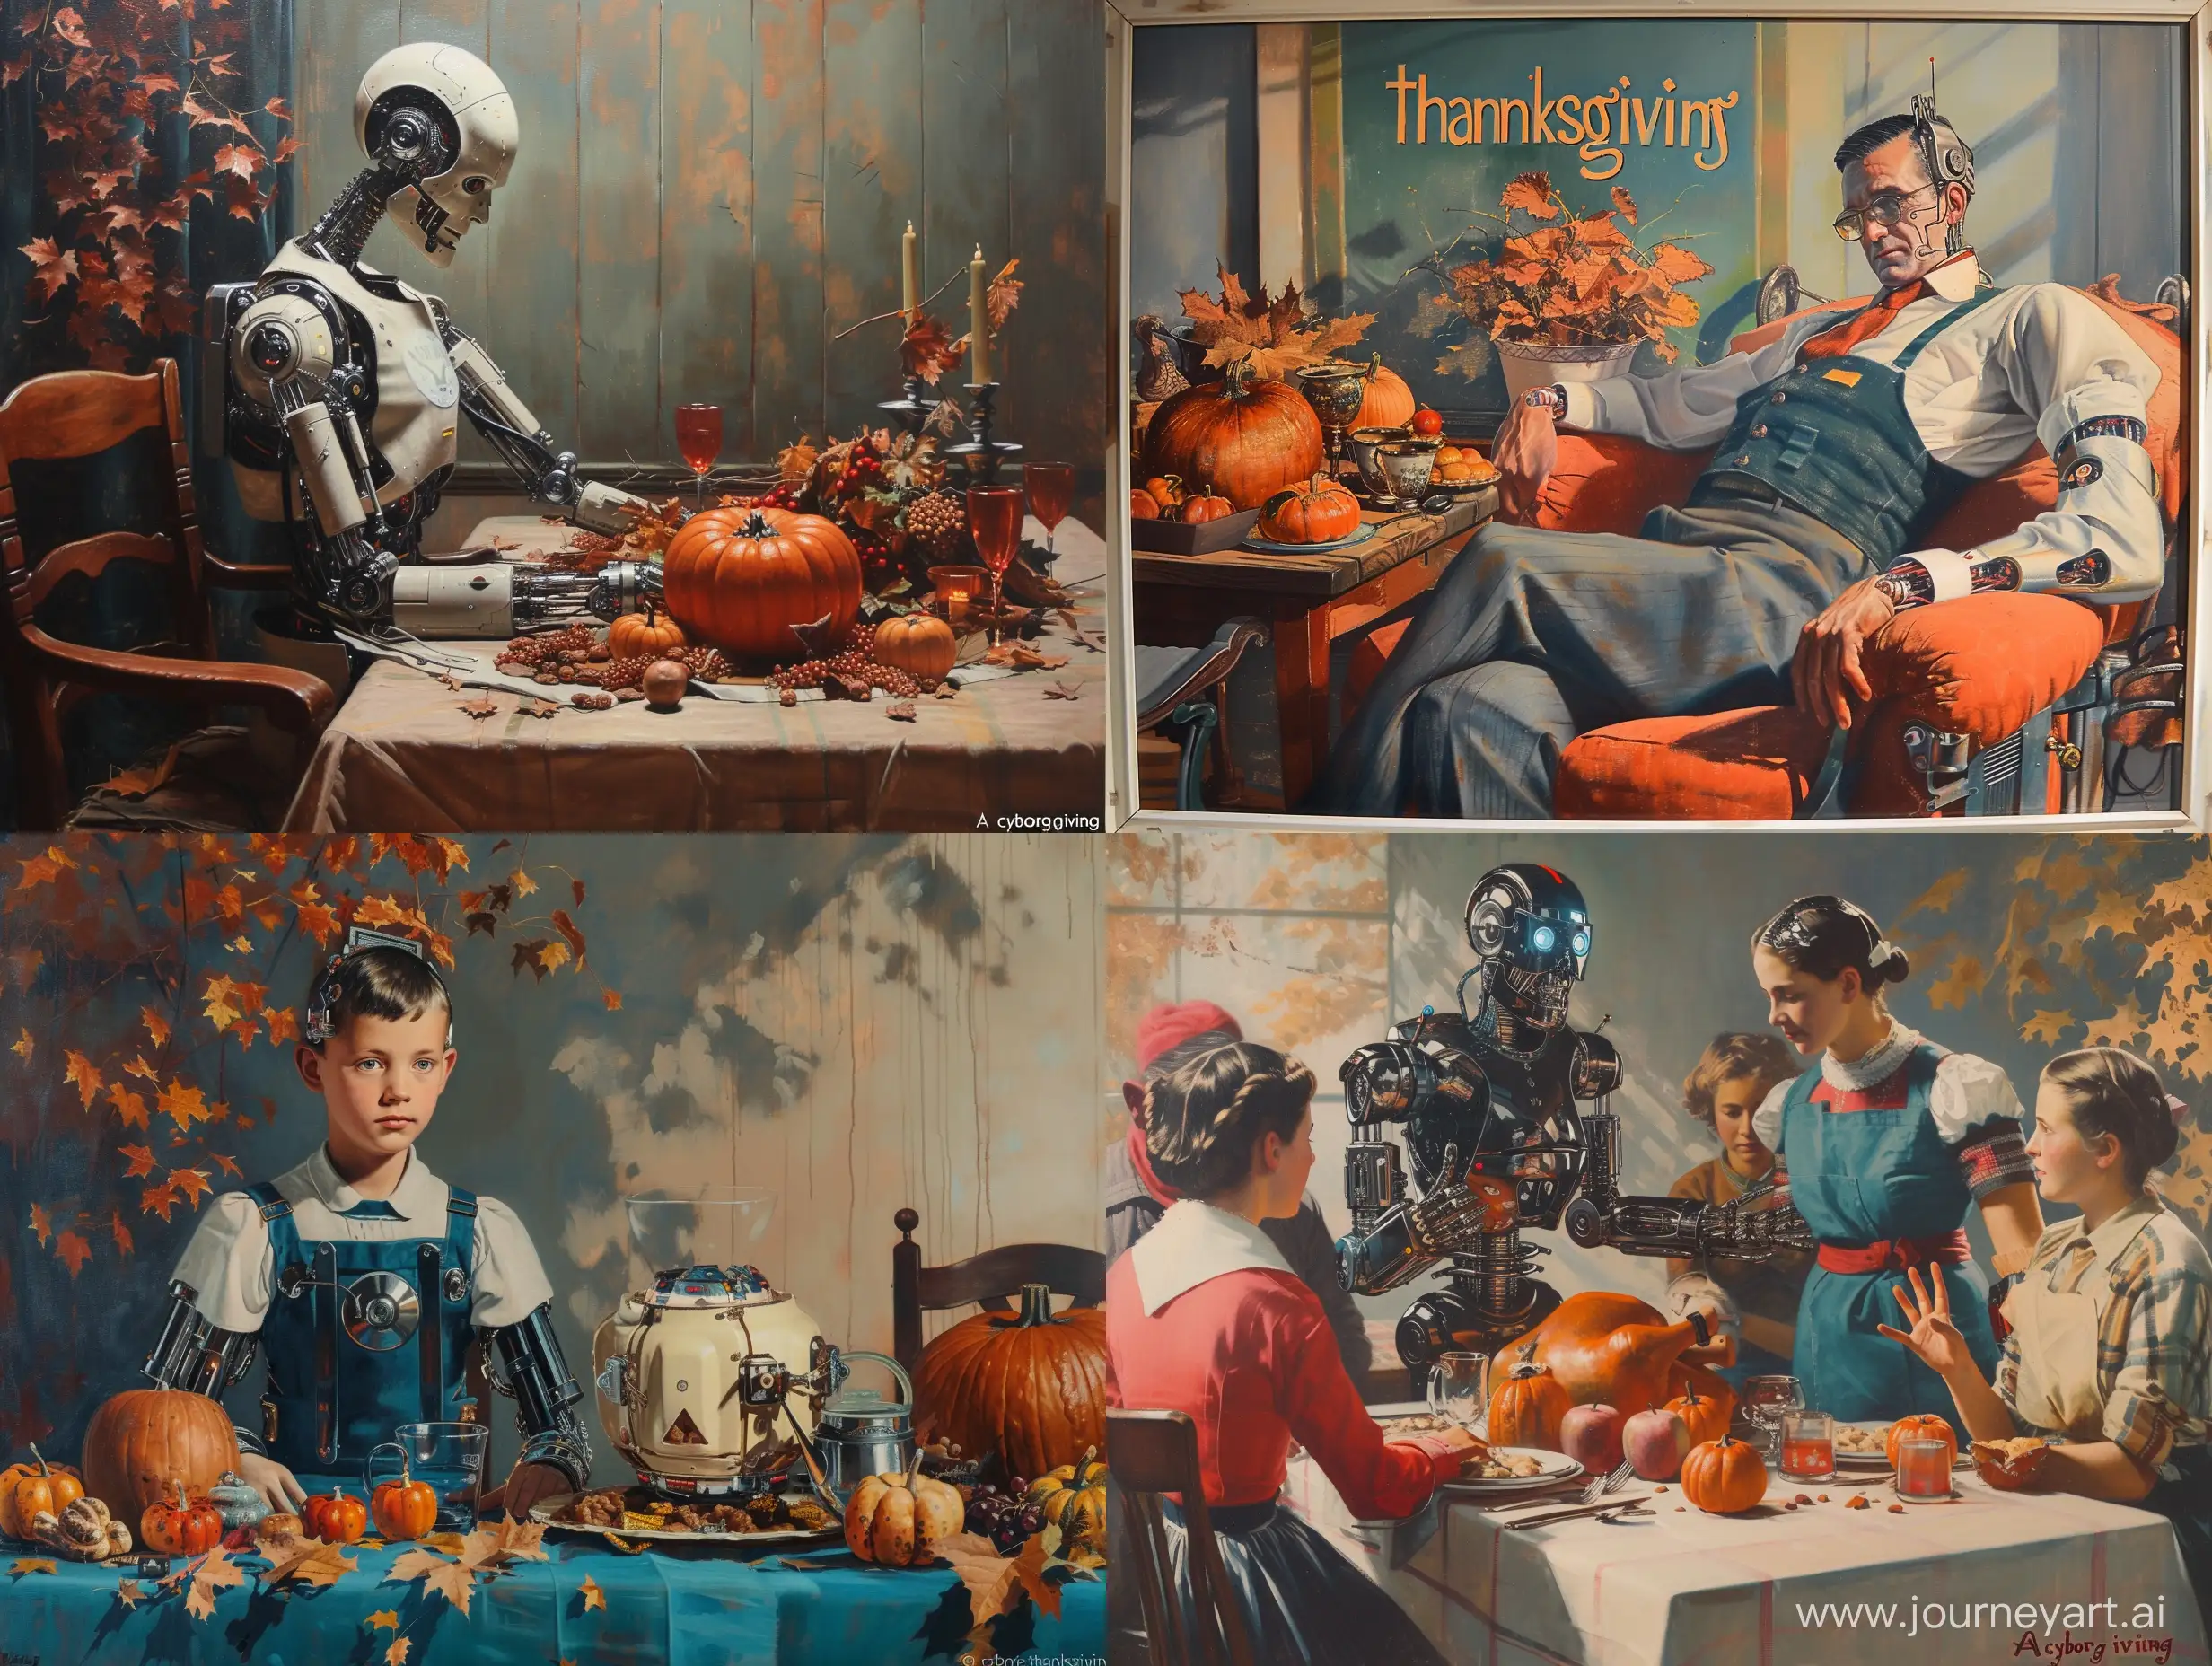 Cyborgs-Celebrating-Thanksgiving-in-Norman-Rockwell-Style